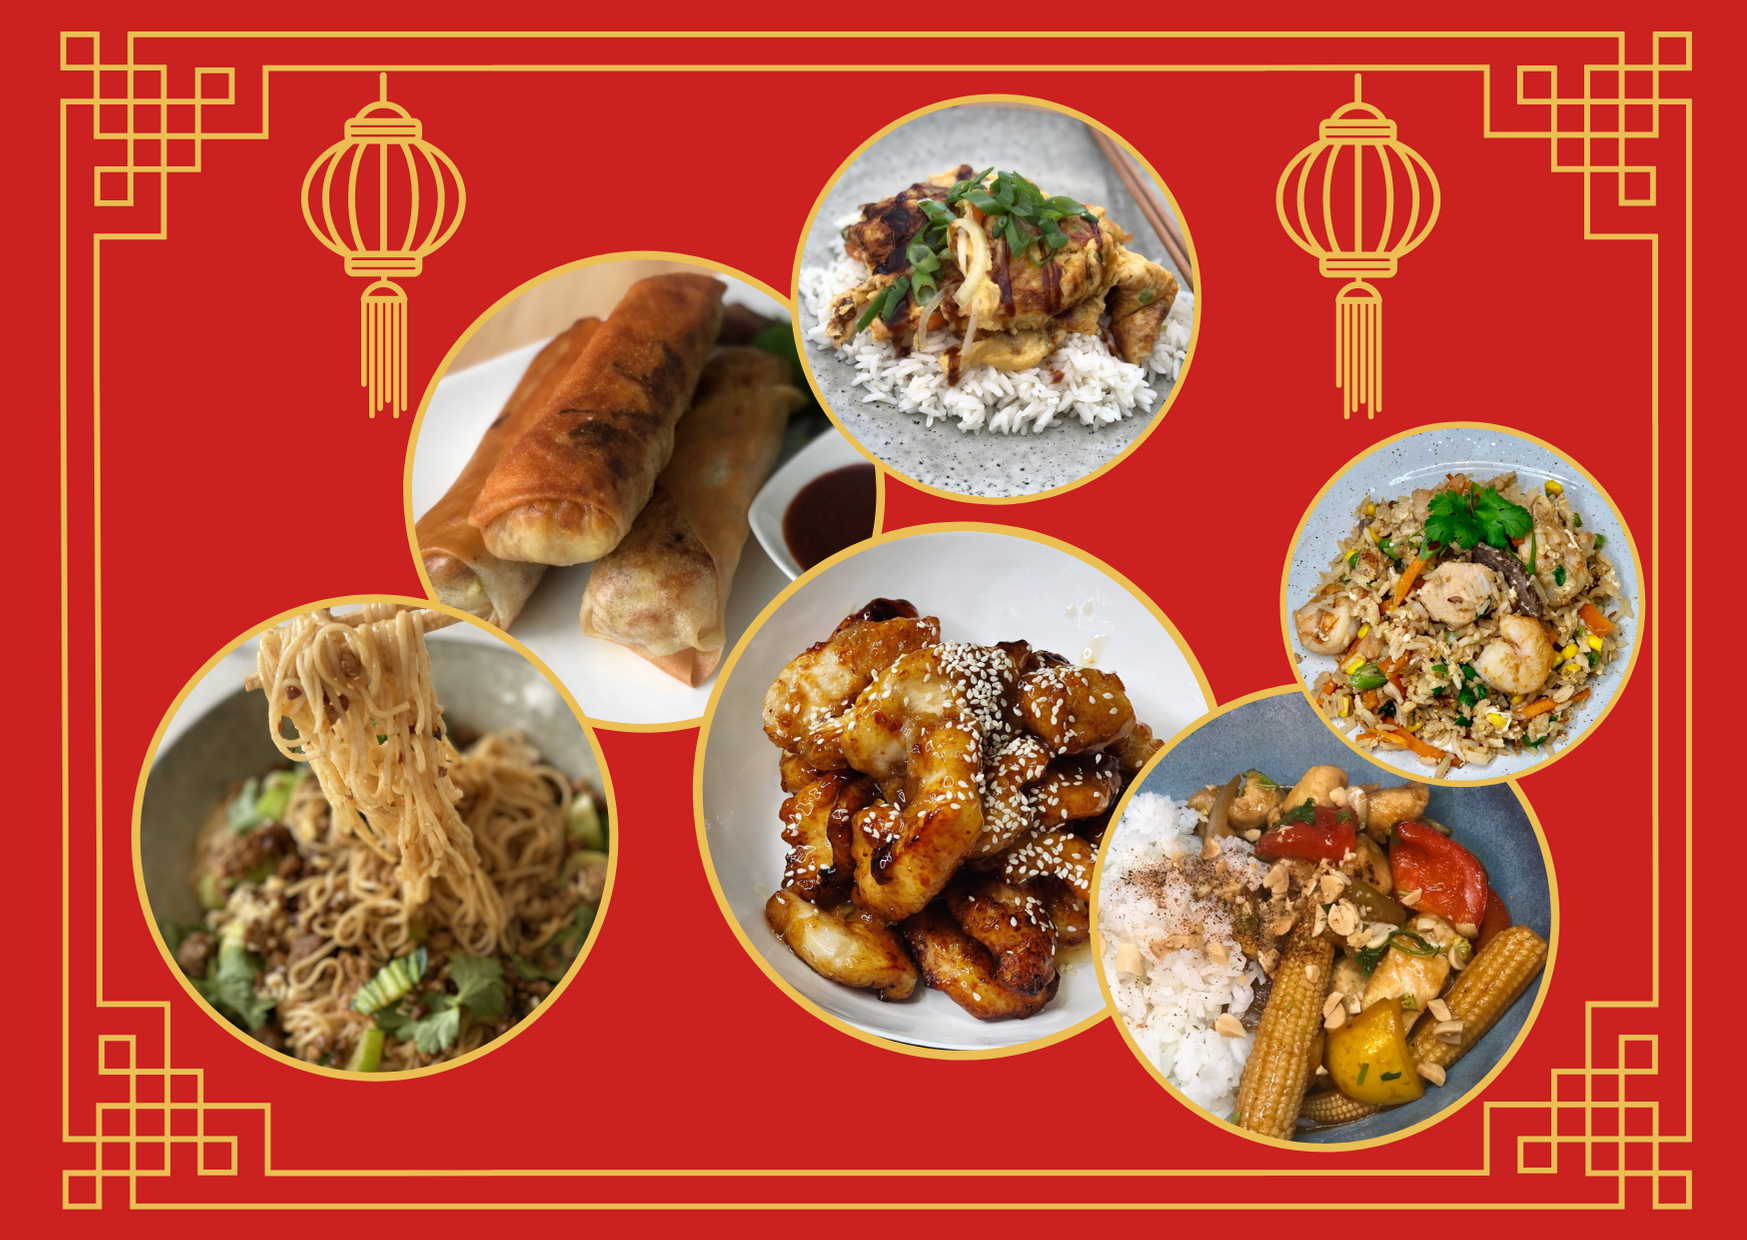 Delicious Recipes to Celebrate Chinese Lunar New Year!